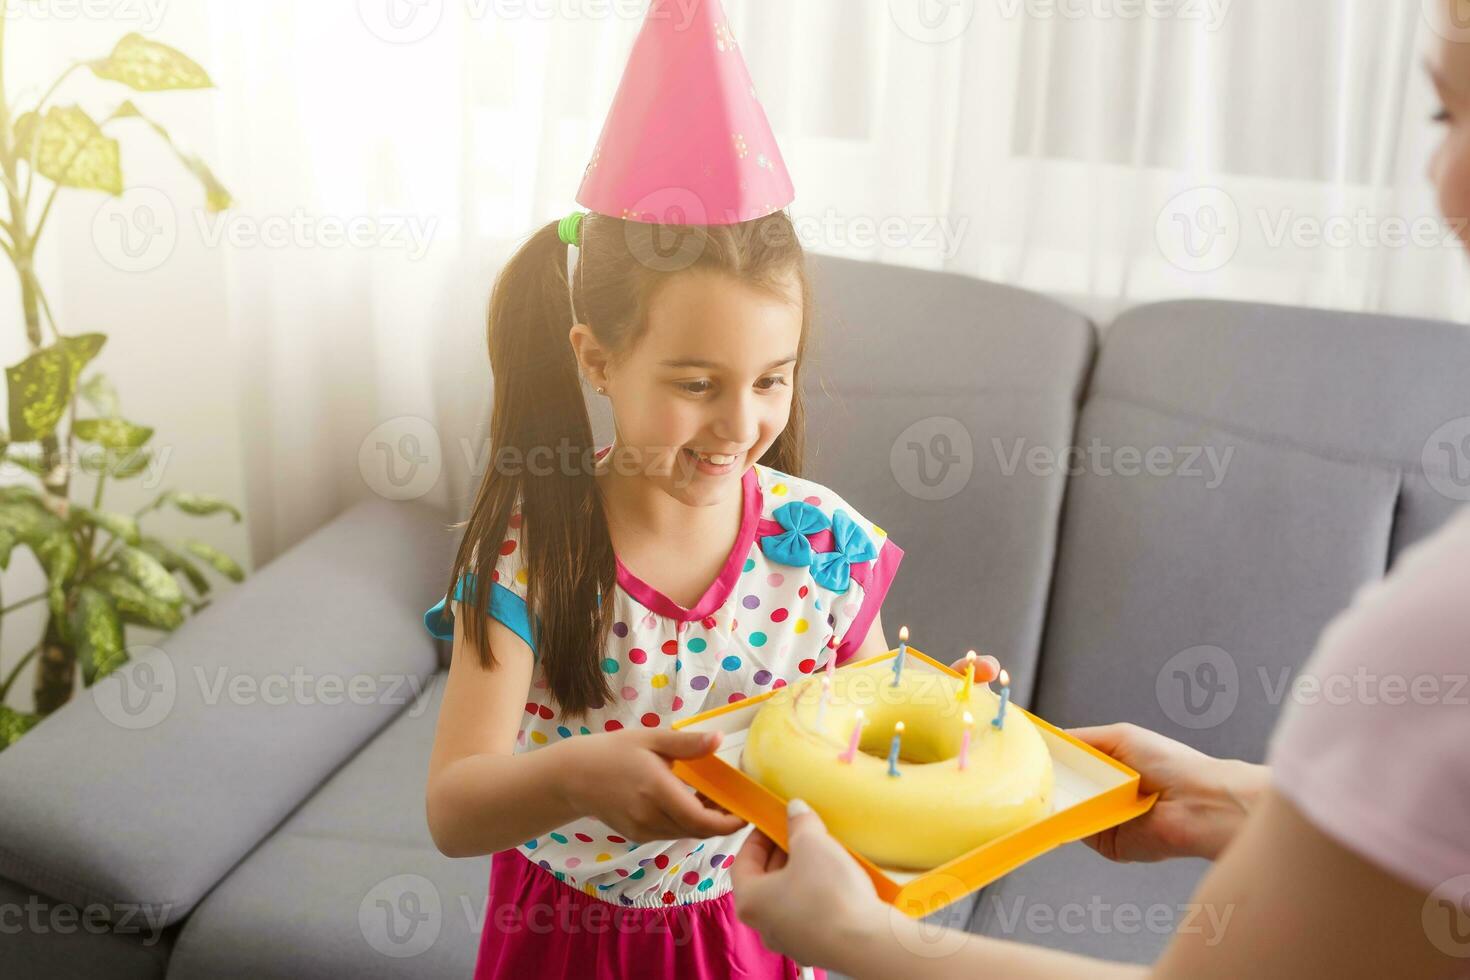 Happy girl sibling celebrating birthday via internet in quarantine time, self-isolation and family values, online birthday party. Congratulations animator via laptop, online. Stay at home photo